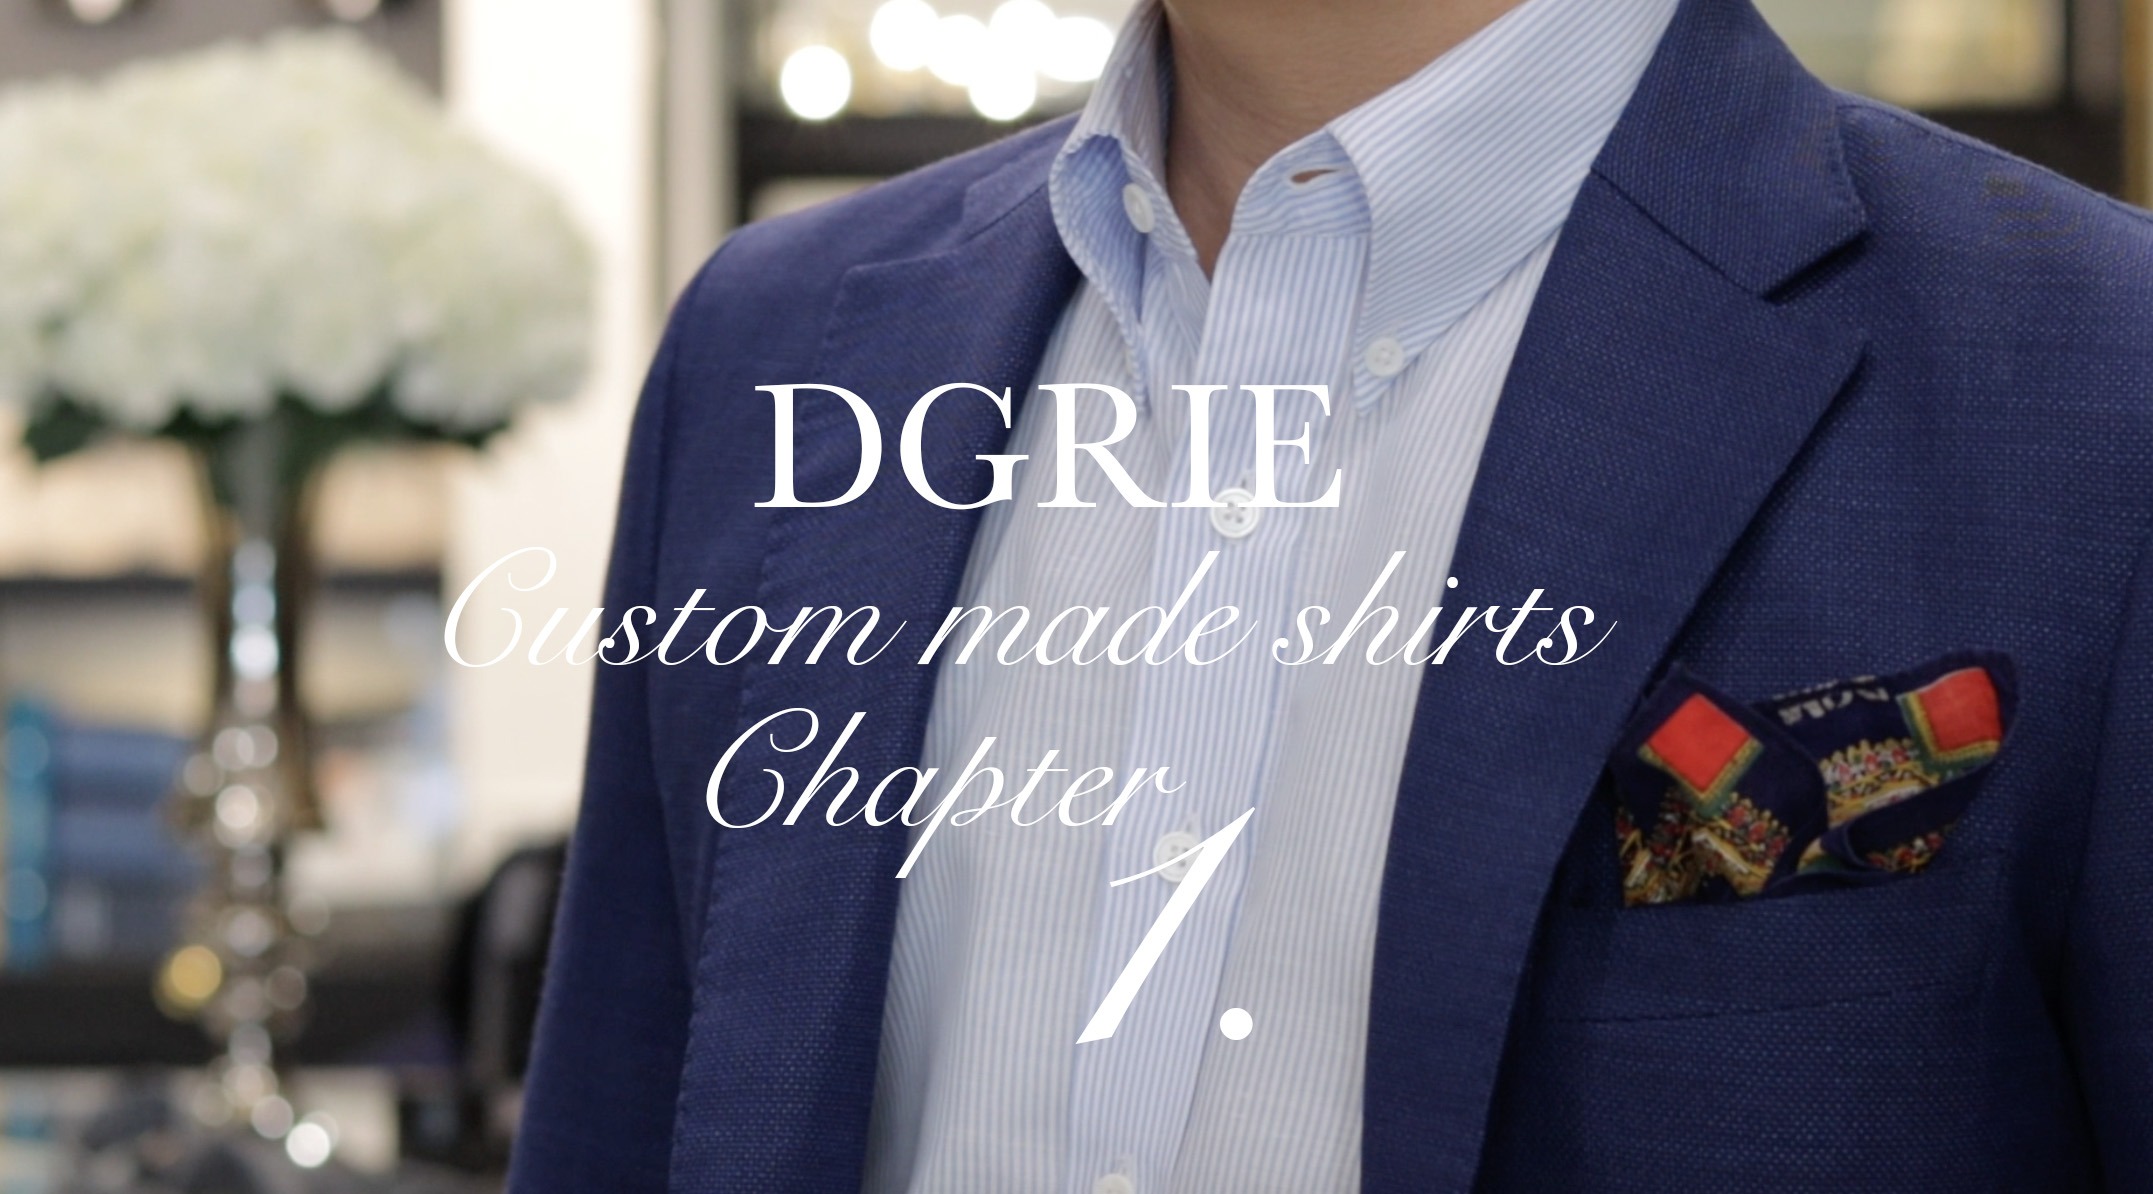 DGRIE CUSTOM MADE SHIRTS & STYLE CHAPTER 1 - DGRIE